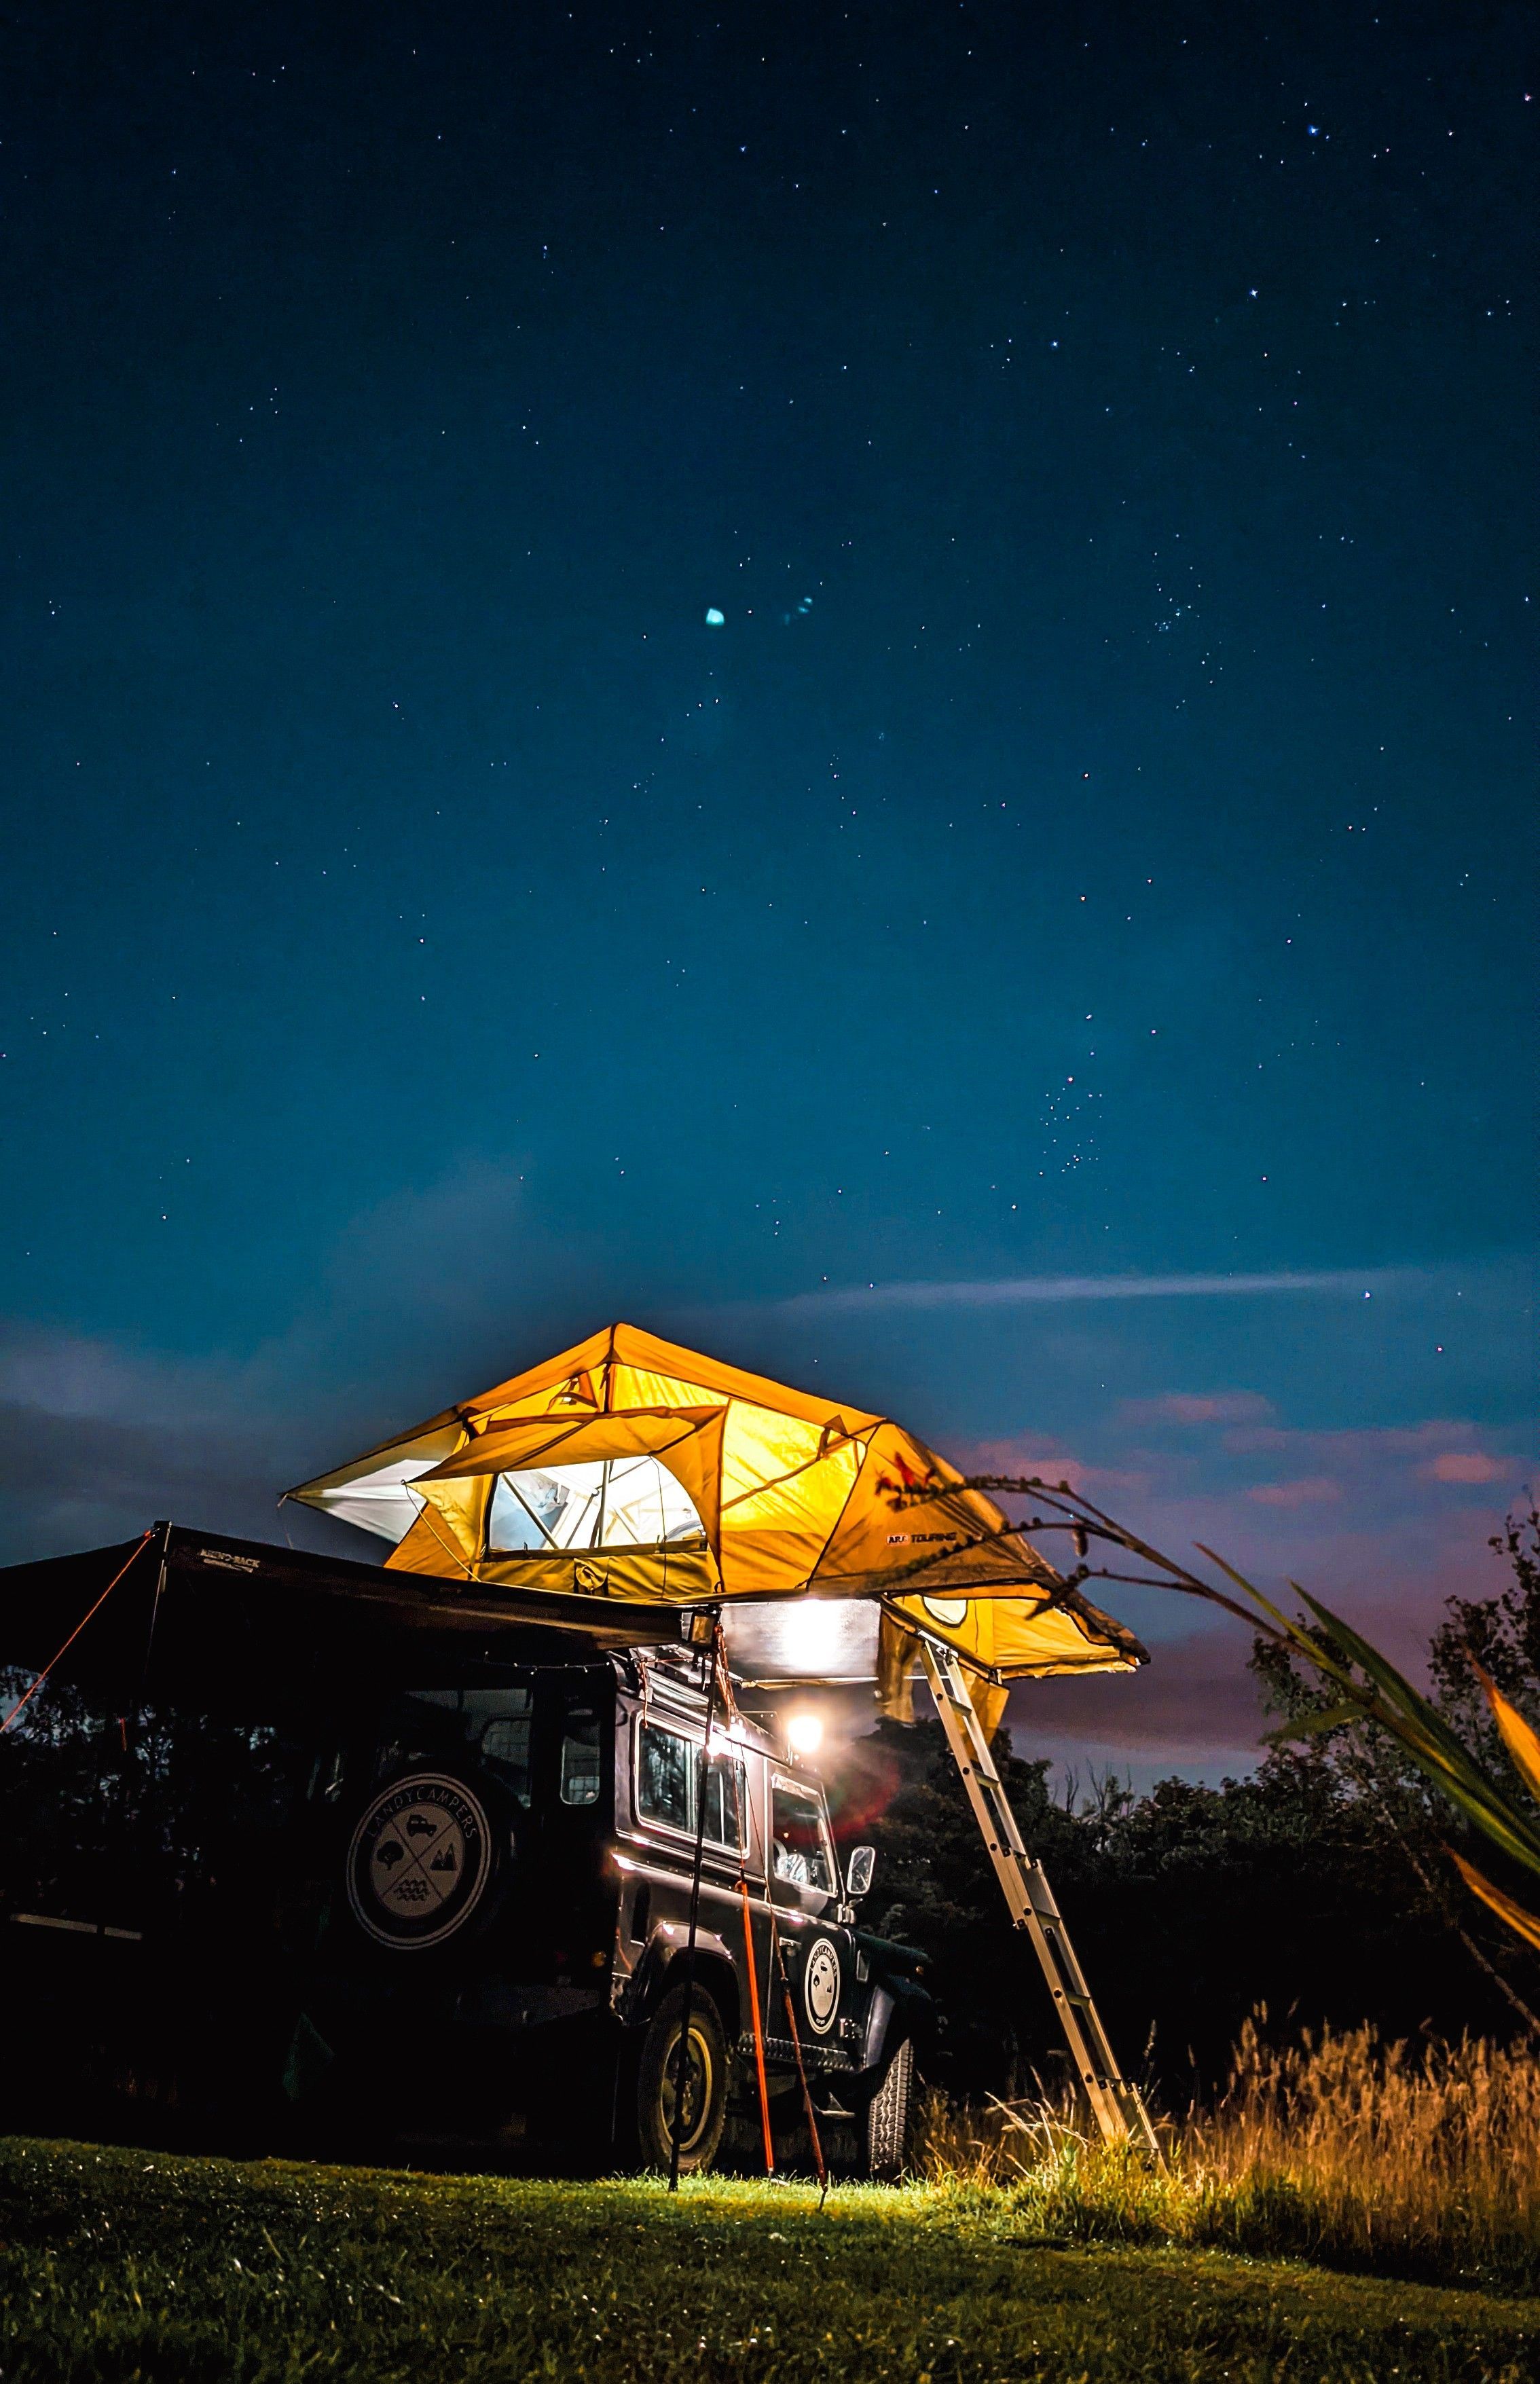 Roof top camping with a Defender. Camping wallpaper, Land rover defender camping, Camping aesthetic